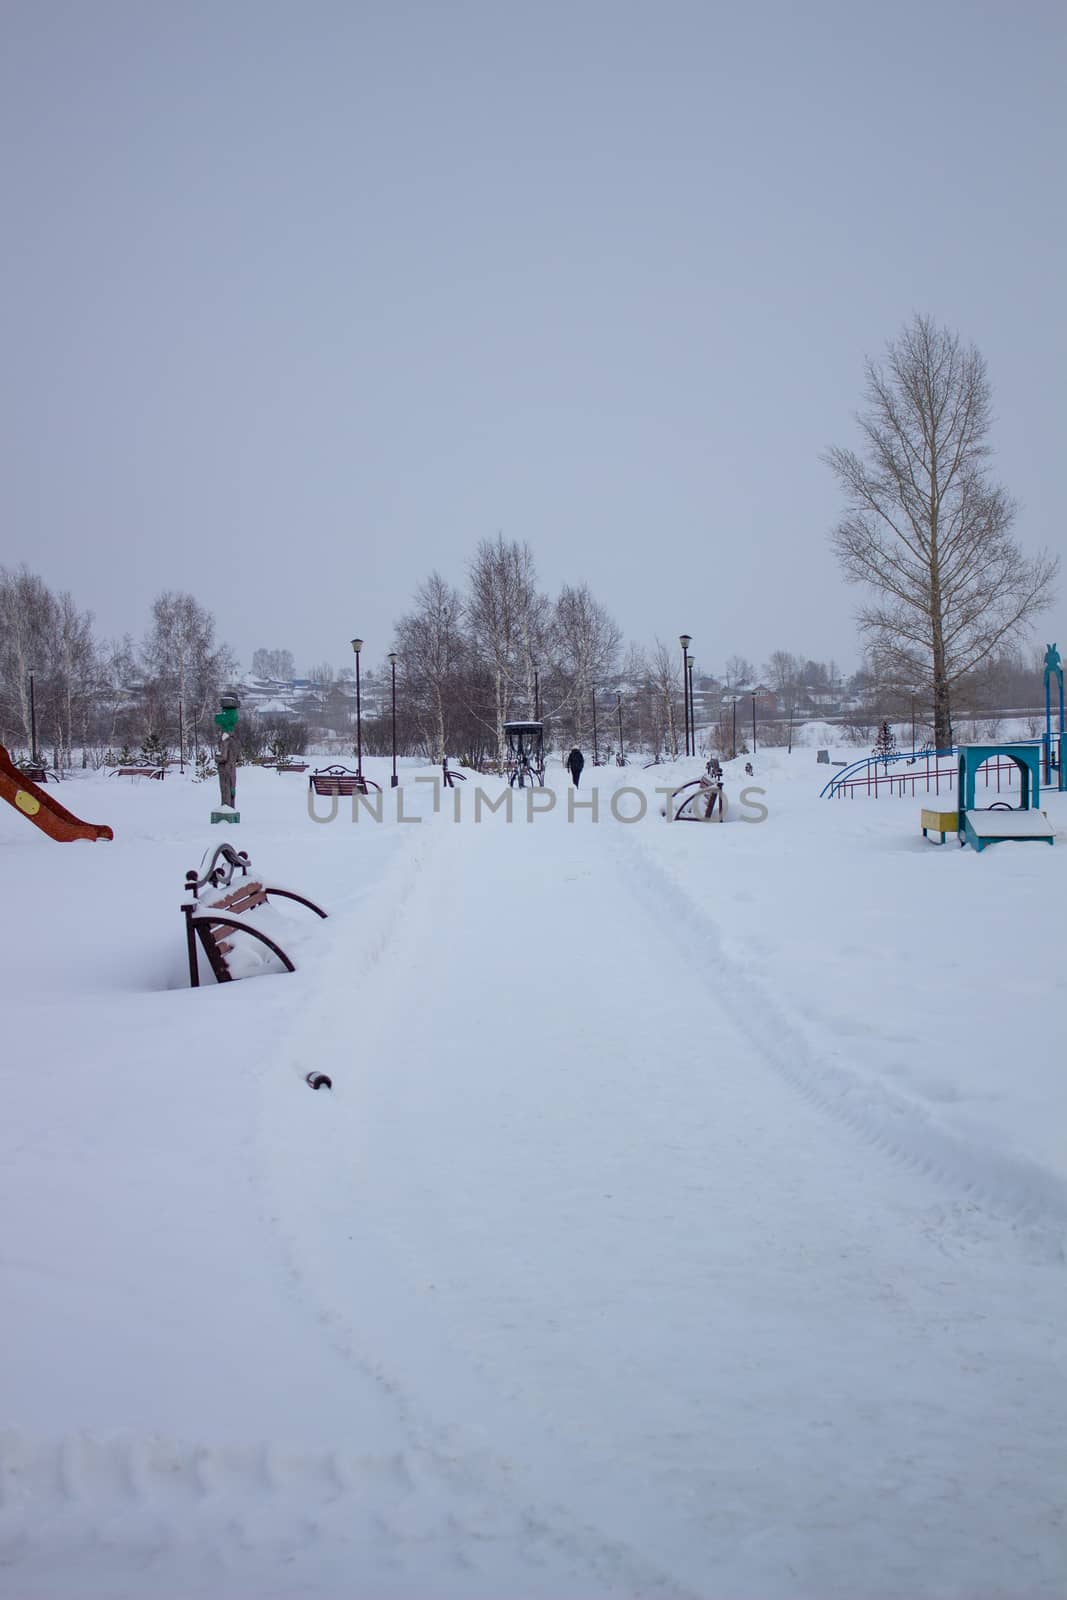 Paths in the winter Park. Bench, Playground for children